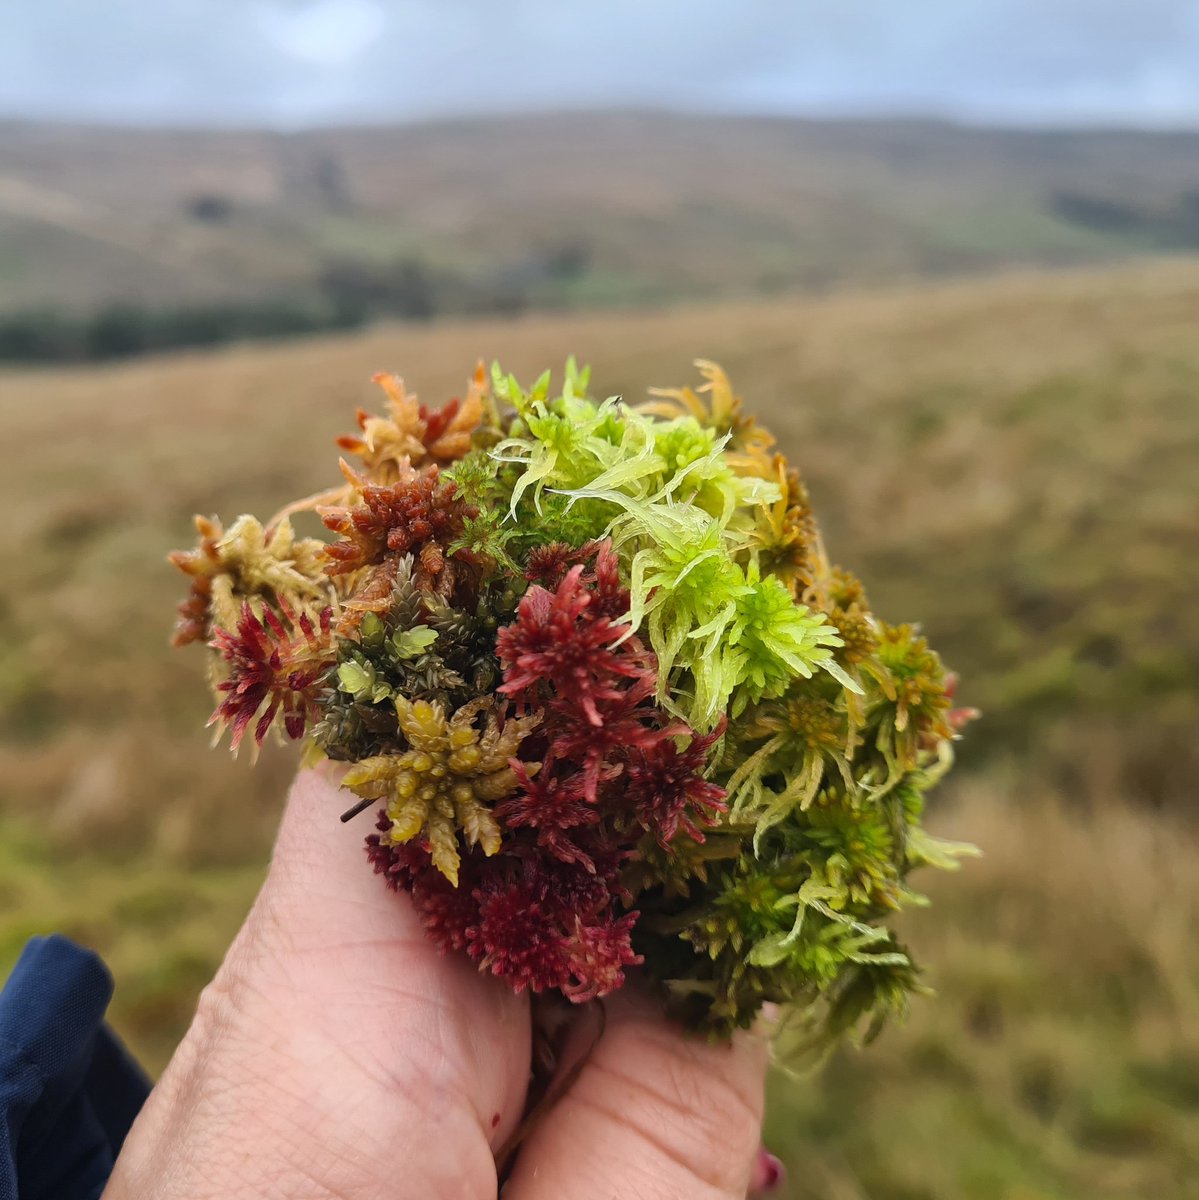 Move over, flowers. Sphagnum mosses make the most beautiful posy. #sphagnummonday